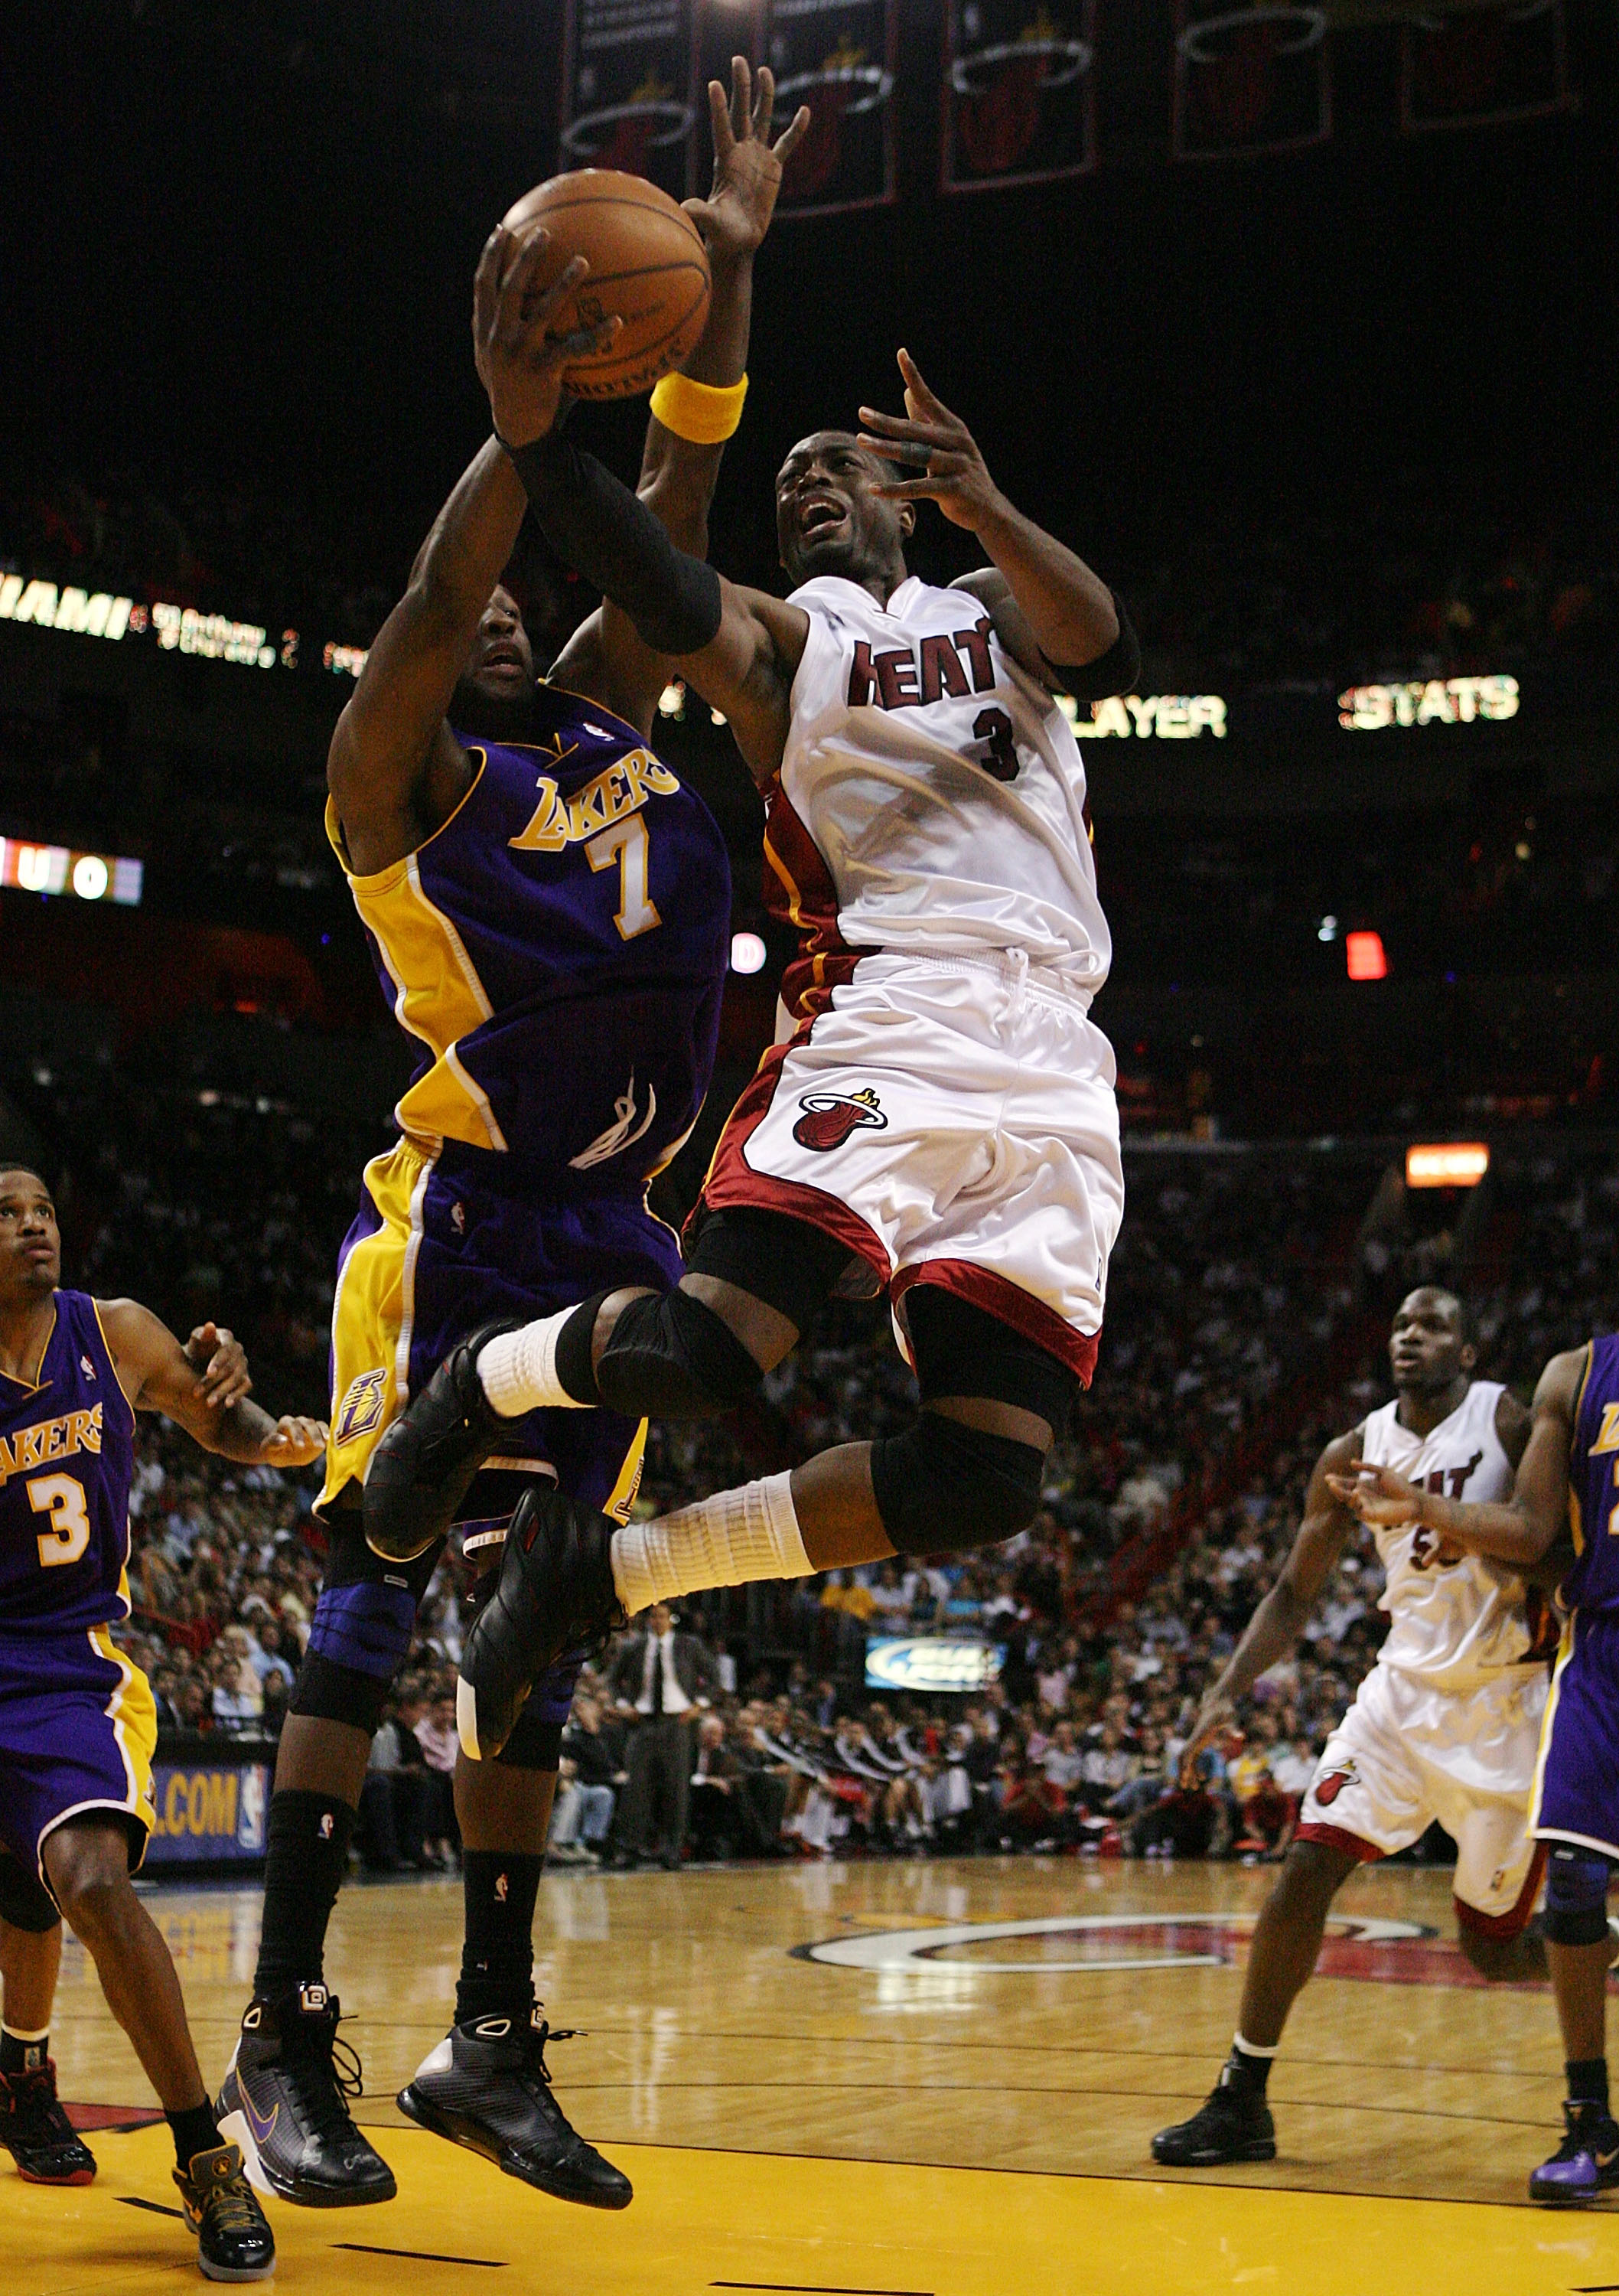 MIAMI - DECEMBER 19:  Dwyane Wade #3 of the Miami Heat scores over Lamar Odom #7 of the Los Angeles Lakers at American Airlines Arena on December 19, 2008 in Miami, Florida. The Heat defeated the Lakers 89-87. NOTE TO USER: User expressly acknowledges and